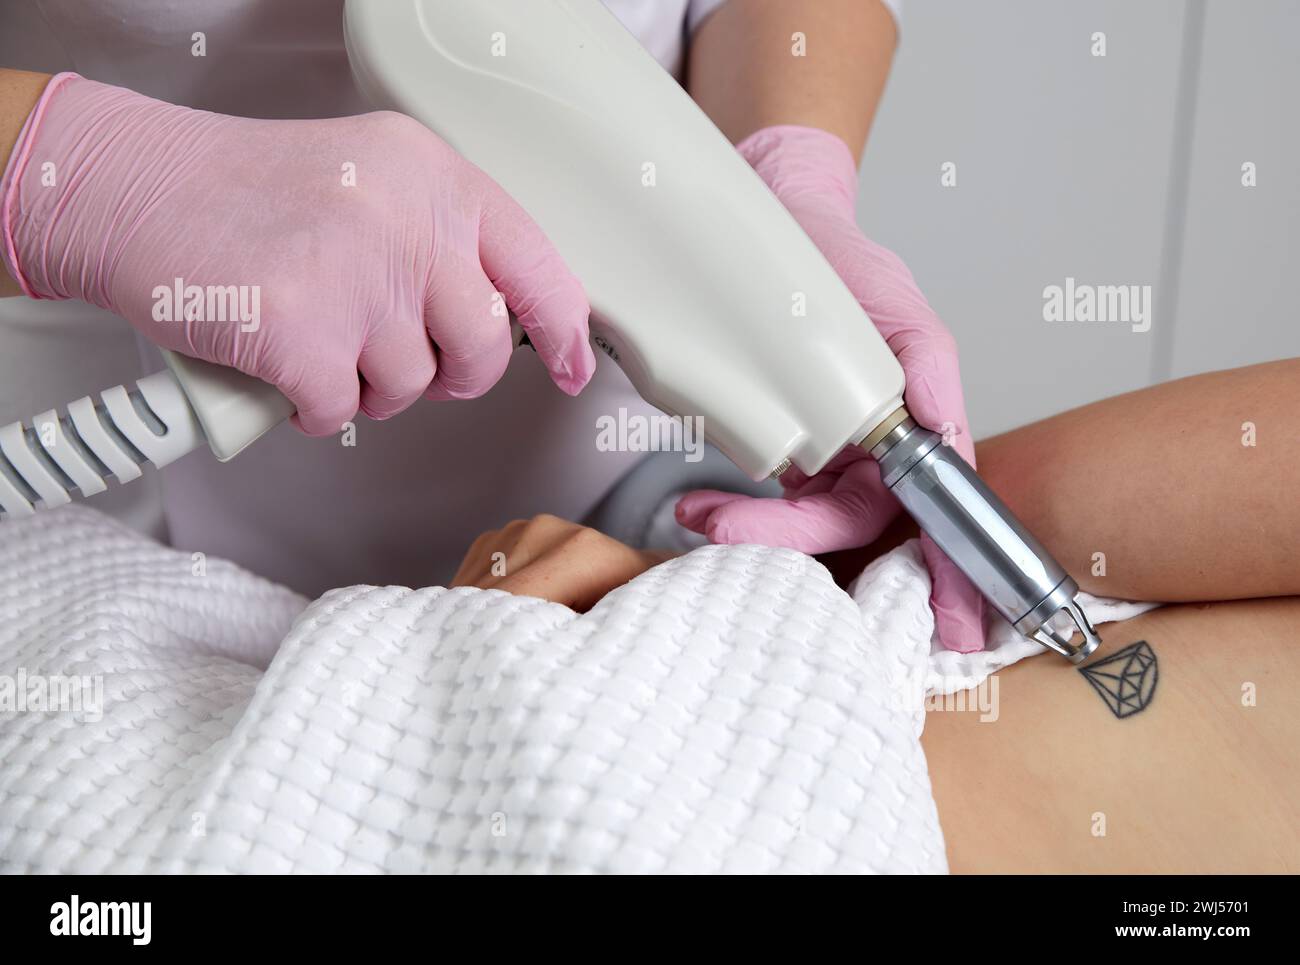 Cosmetologist using laser device to remove an unwanted tattoo from female arm. Concept of erasing tattoos as an expensive proced Stock Photo